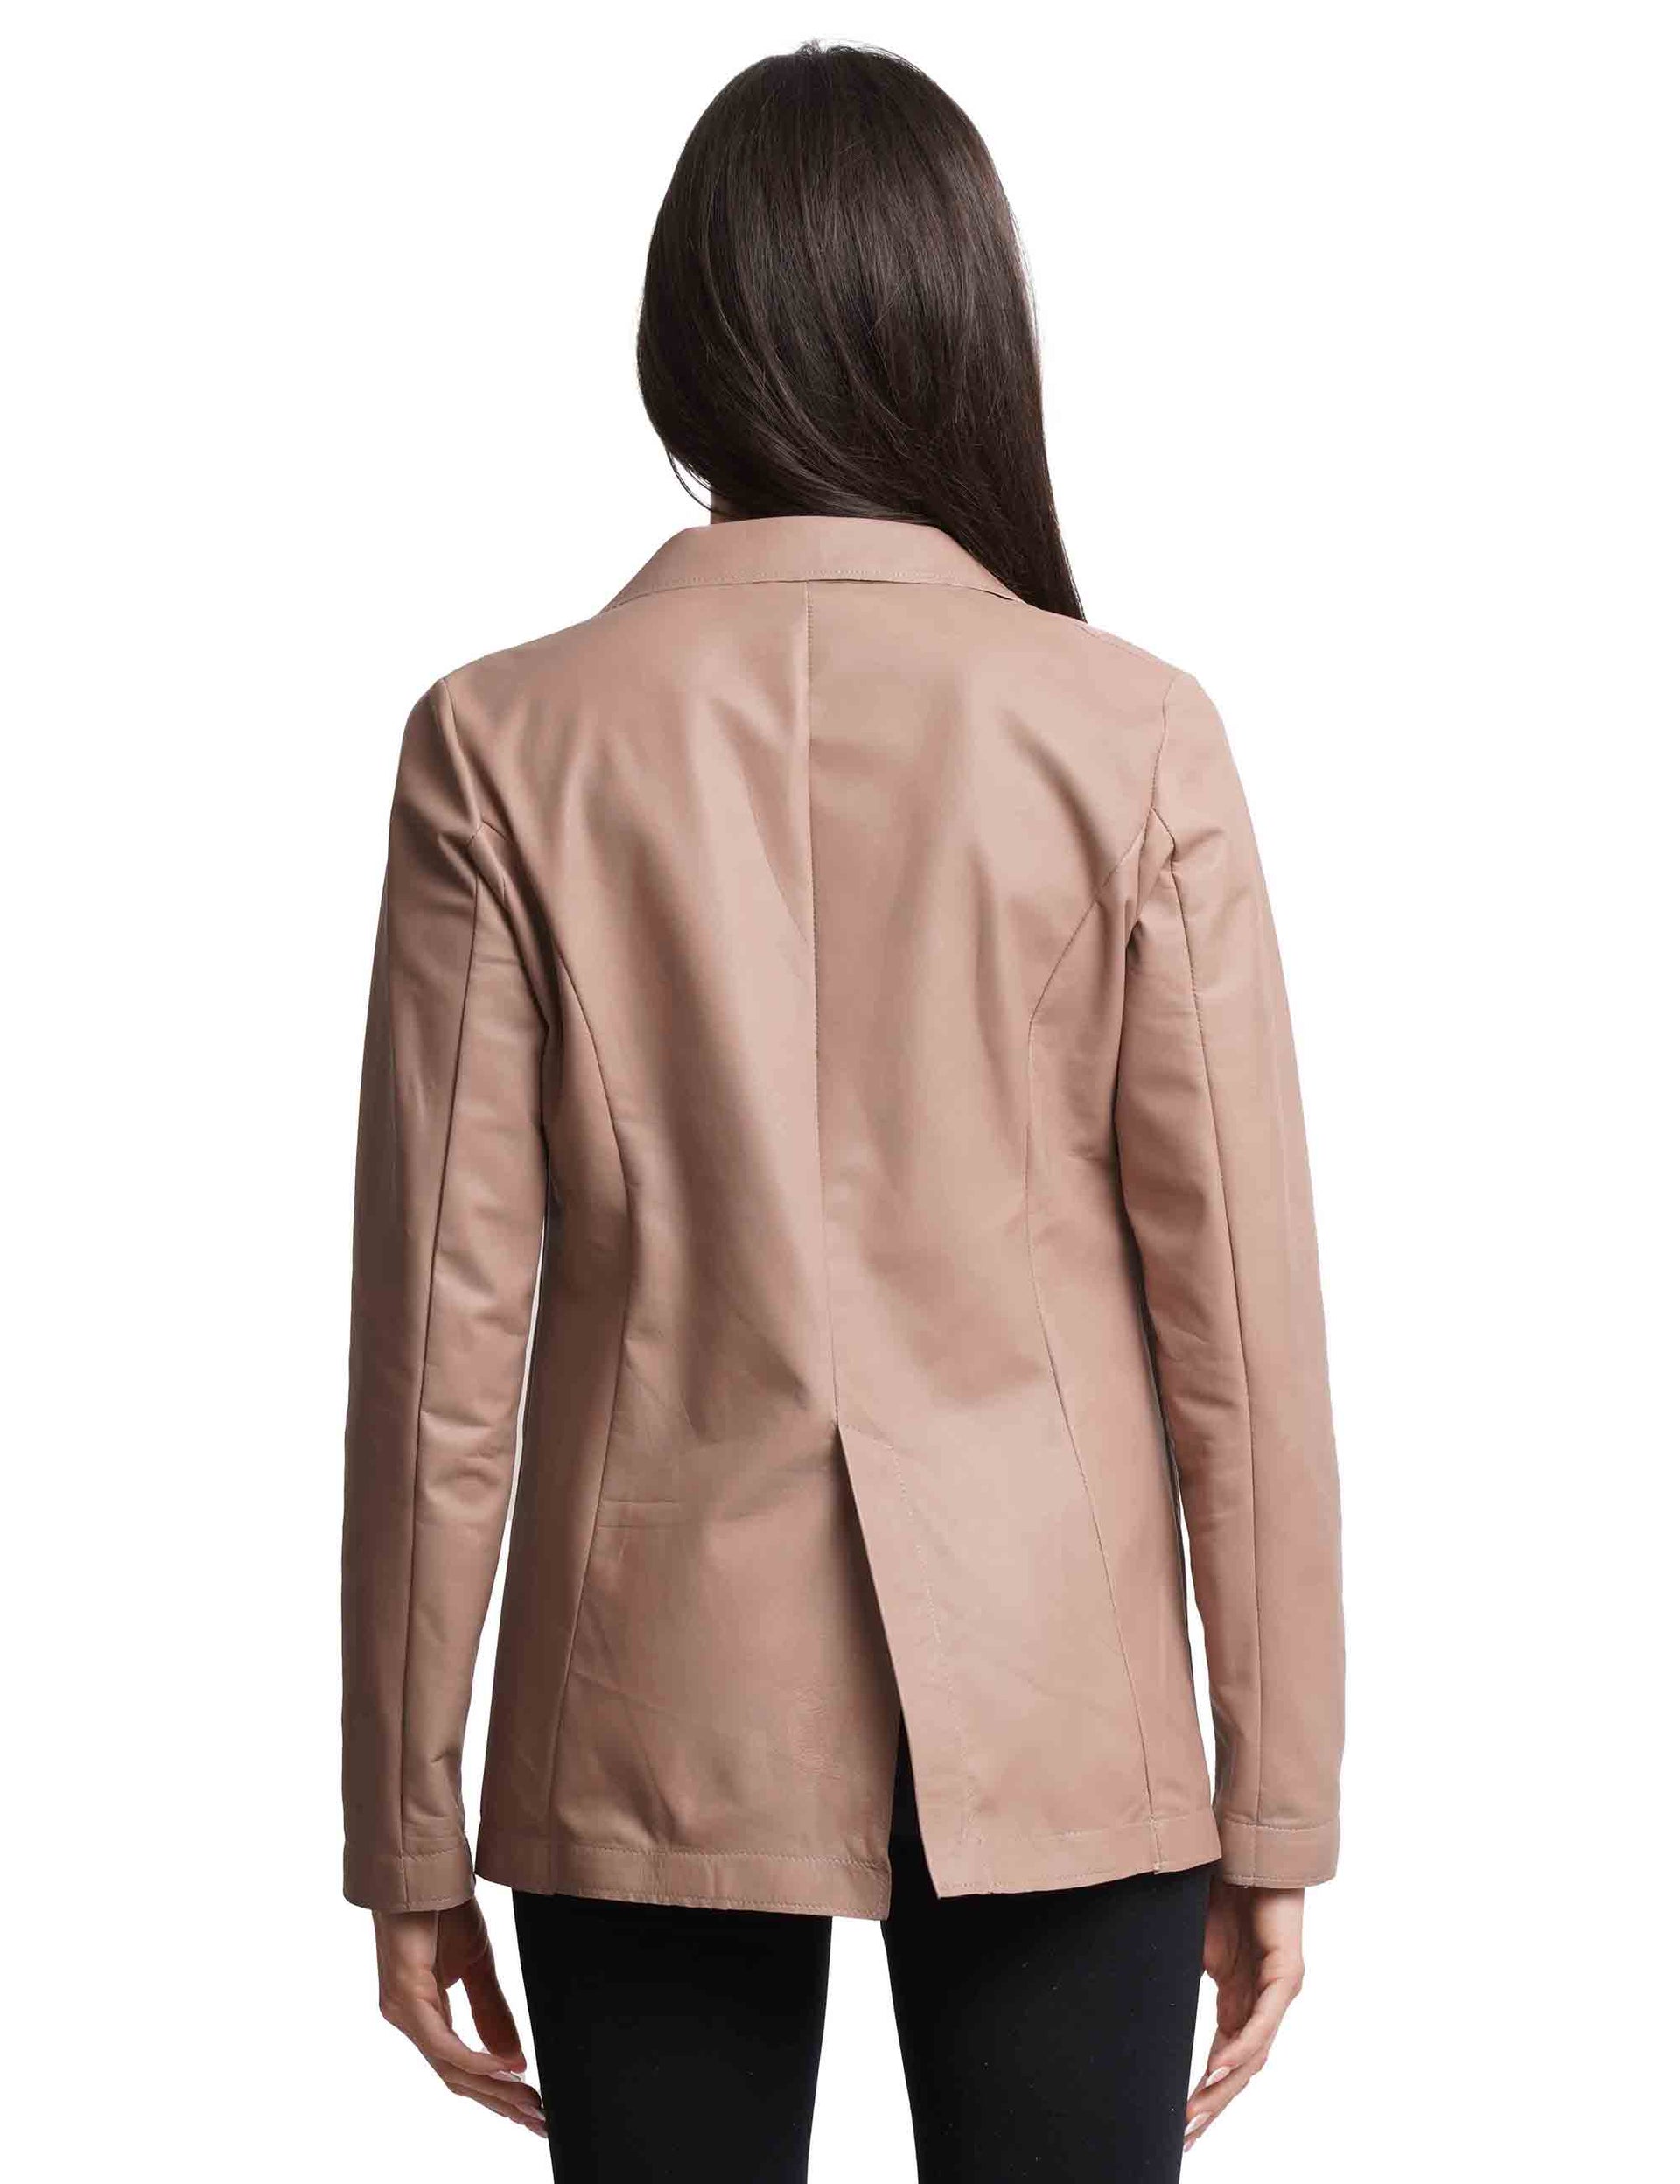 Single-breasted women's jackets in nude unlined leather with 1 button